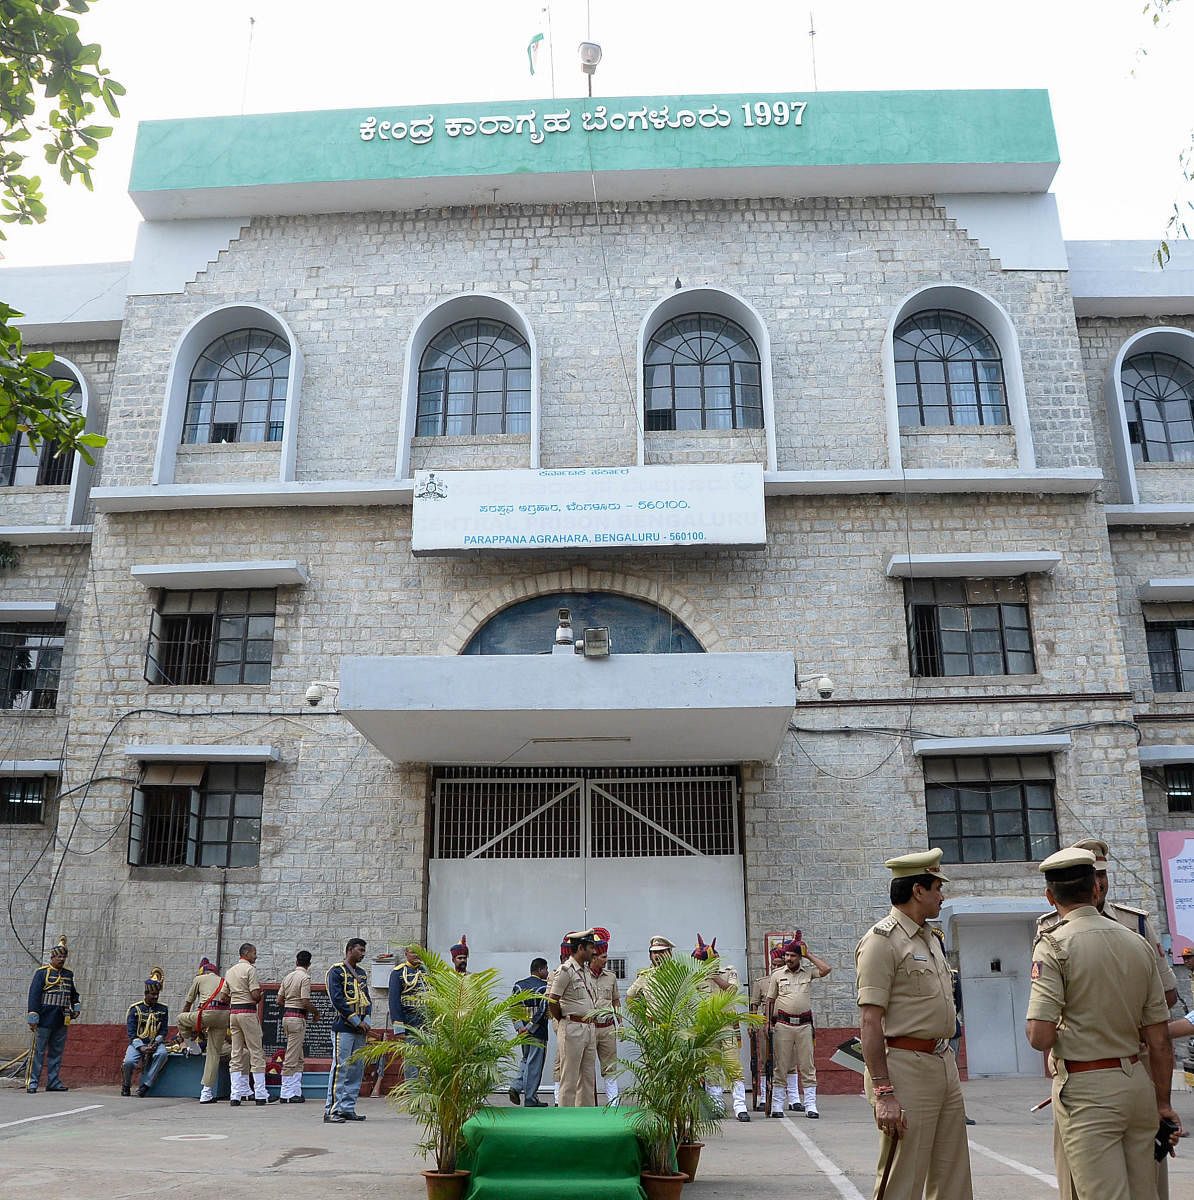 5 undertrials lend cell phones to inmates, caught